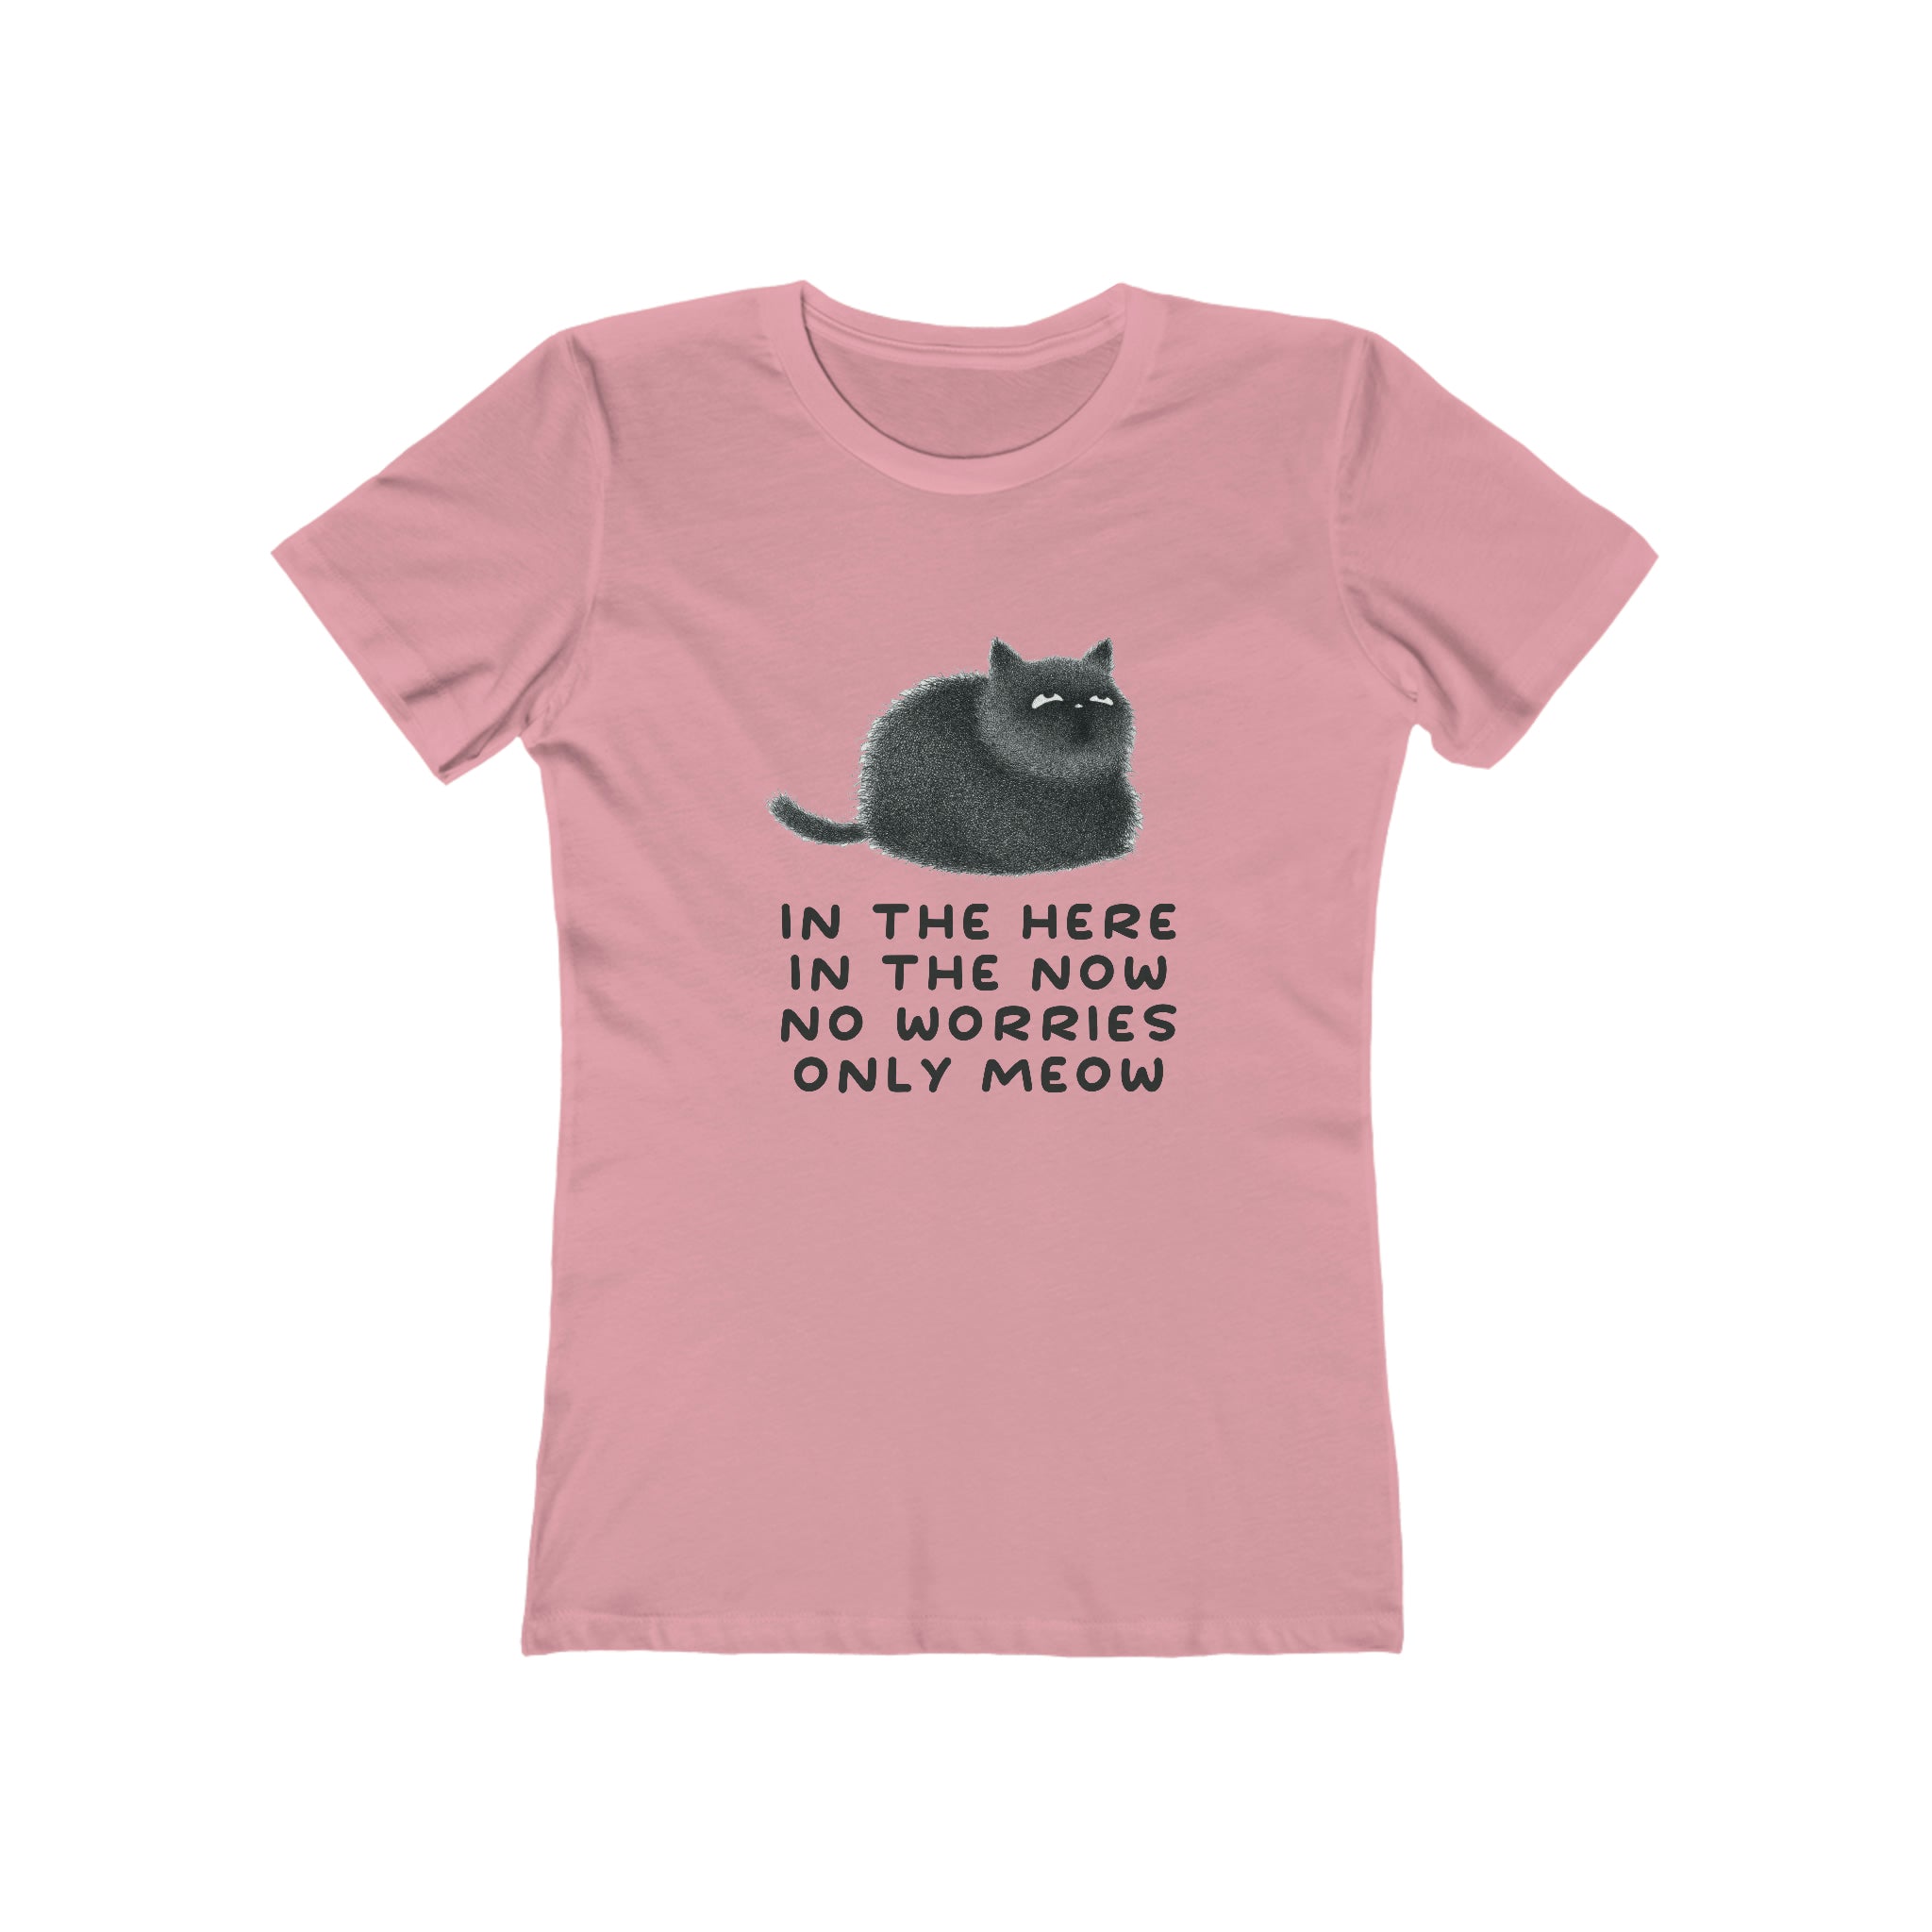 Only Meow : Women's 100% Cotton T-Shirt